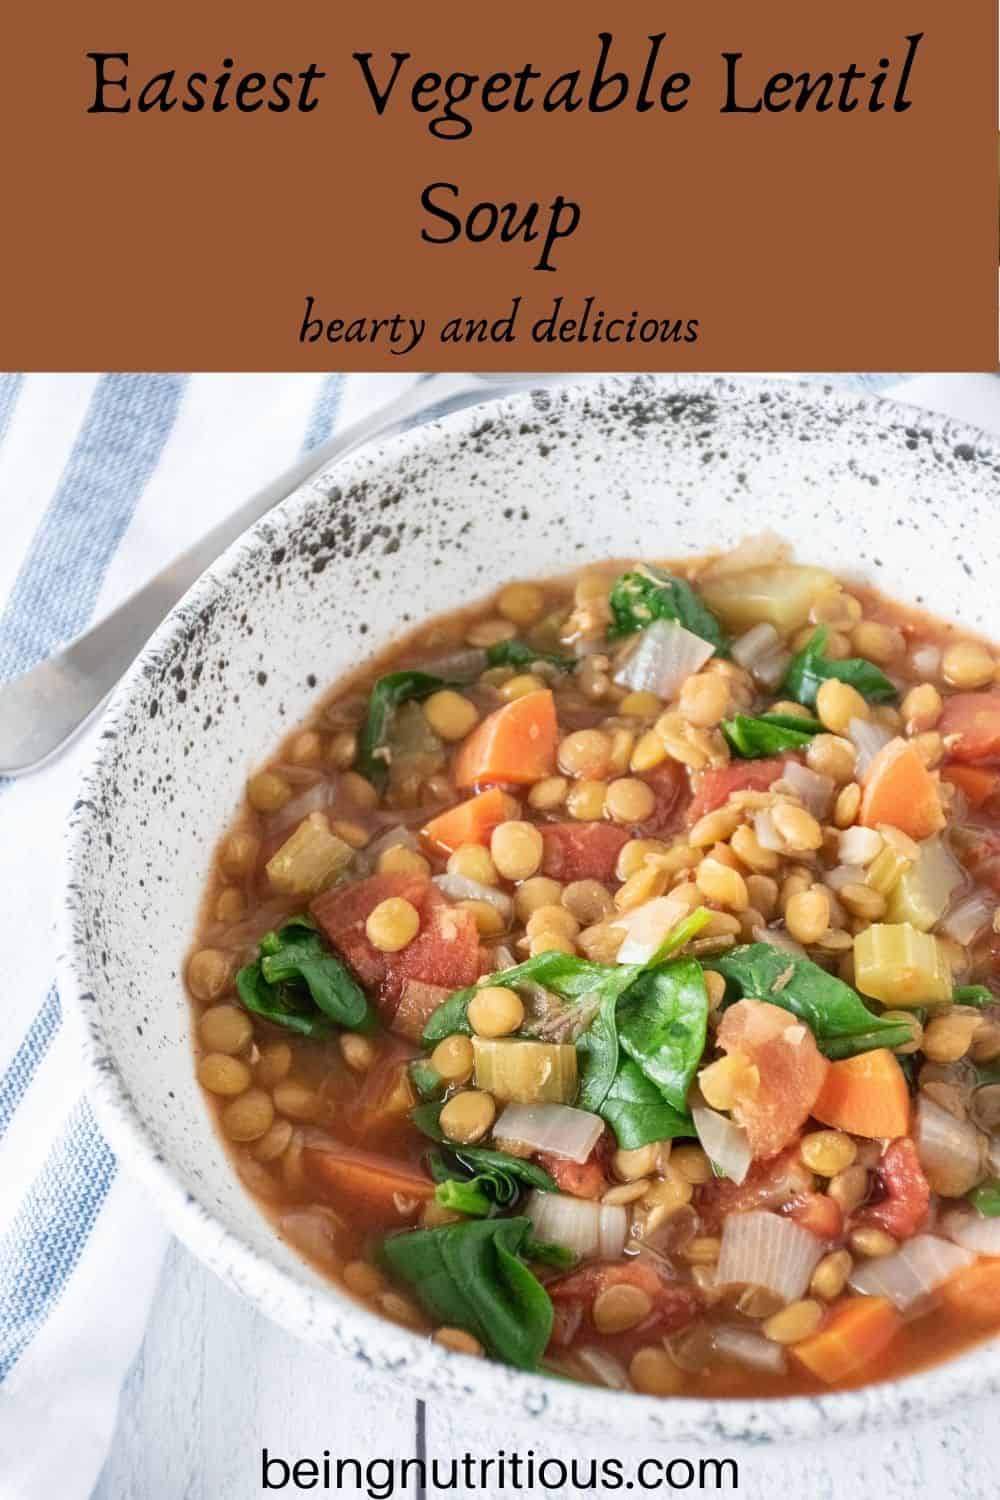 Lentil soup in a bowl. Text overlay: Easiest Vegetable Lentil soup; hearty and delicious.